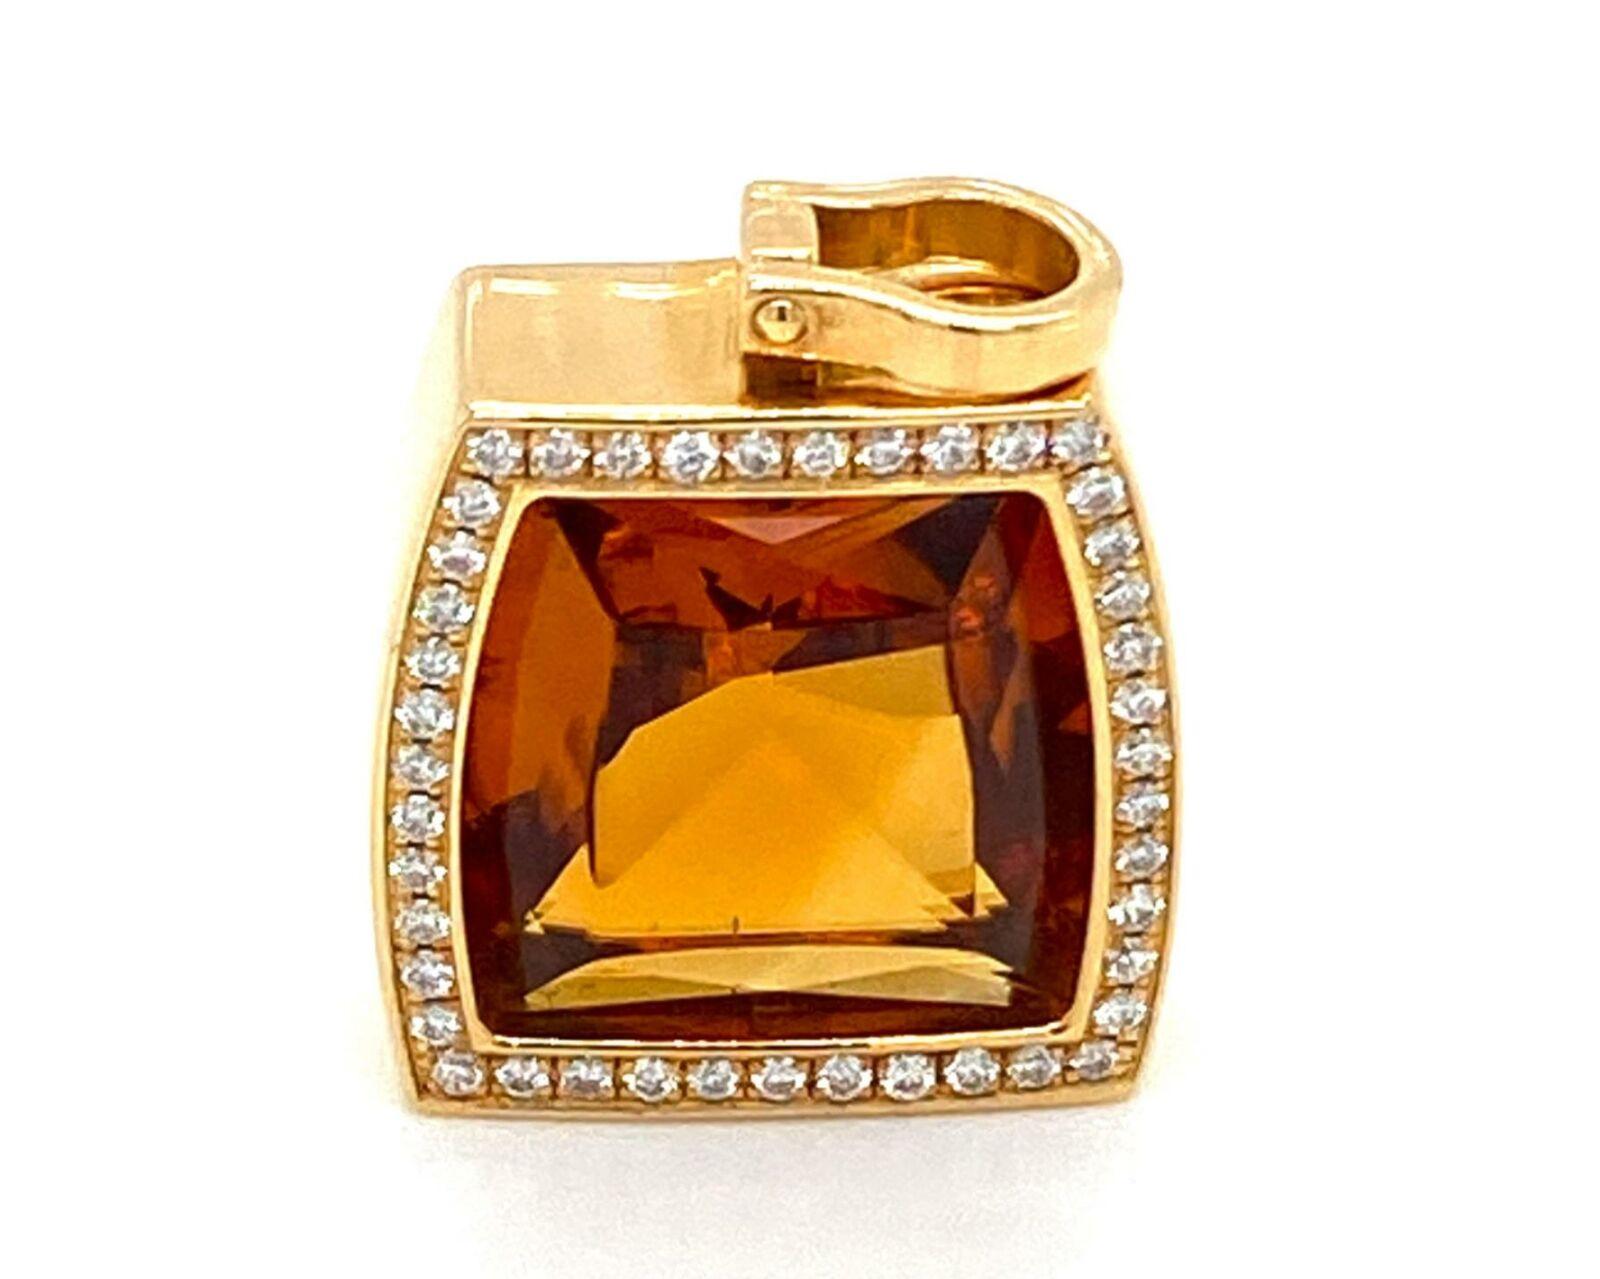 Elite and authentic by Cartier from the LA DONA collection. This gorgeous pendant is crafted from 18k yellow gold with a fine polished finish featuring a cushion shaped vibrant citrine gemstone mounted in the center of gold frame and bordered with